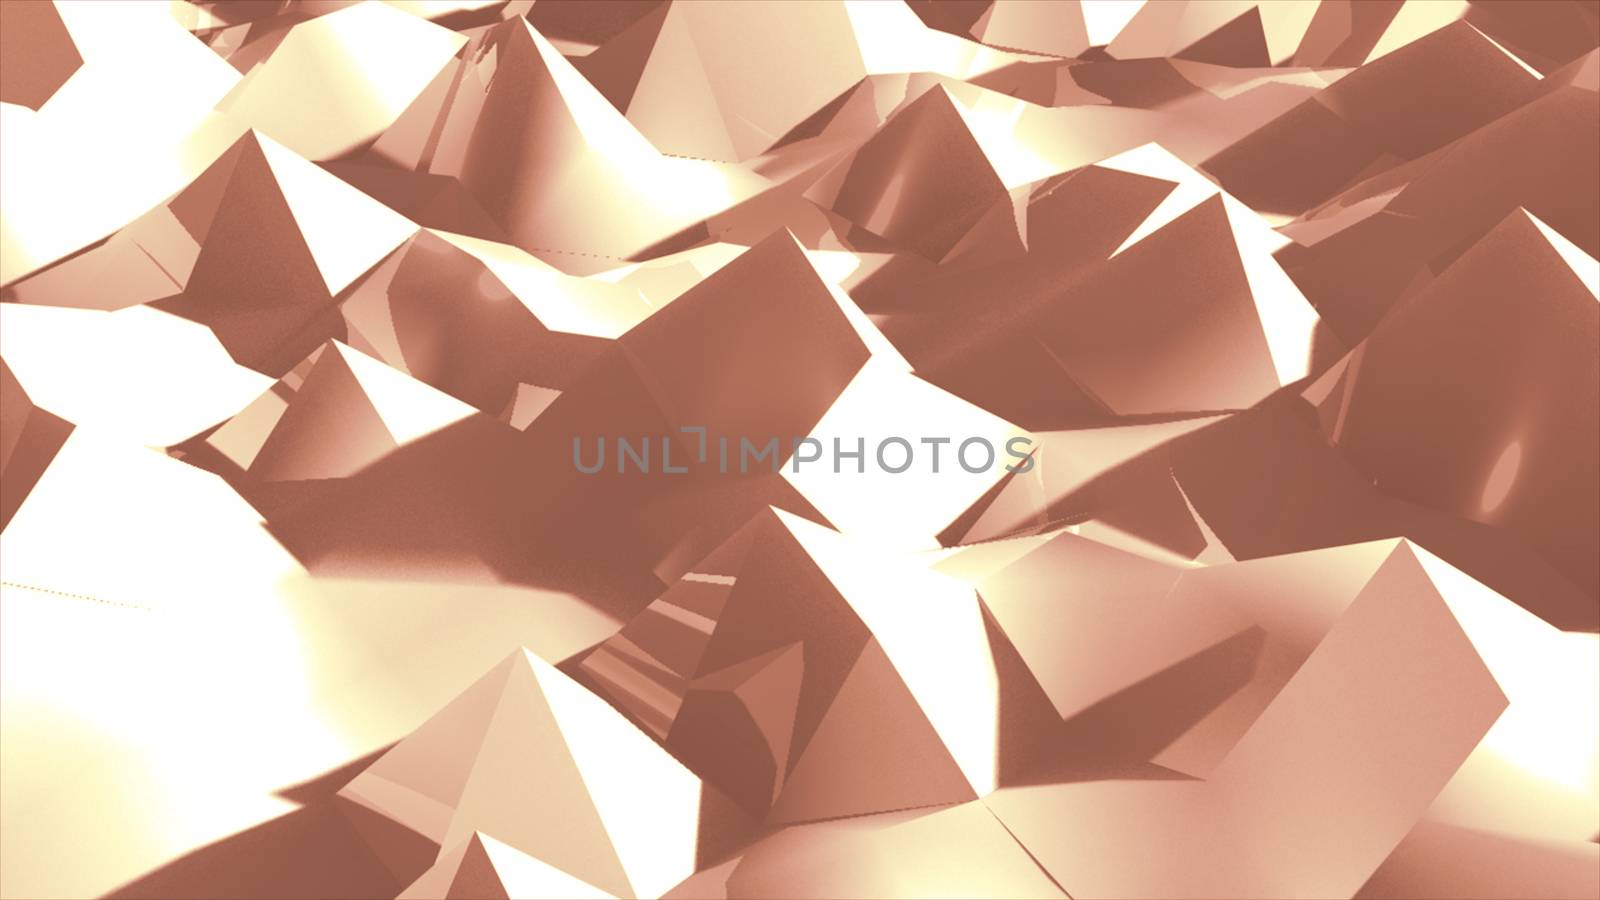 Low poly geometric abstract background in embossed triangular and polygon style by nolimit046